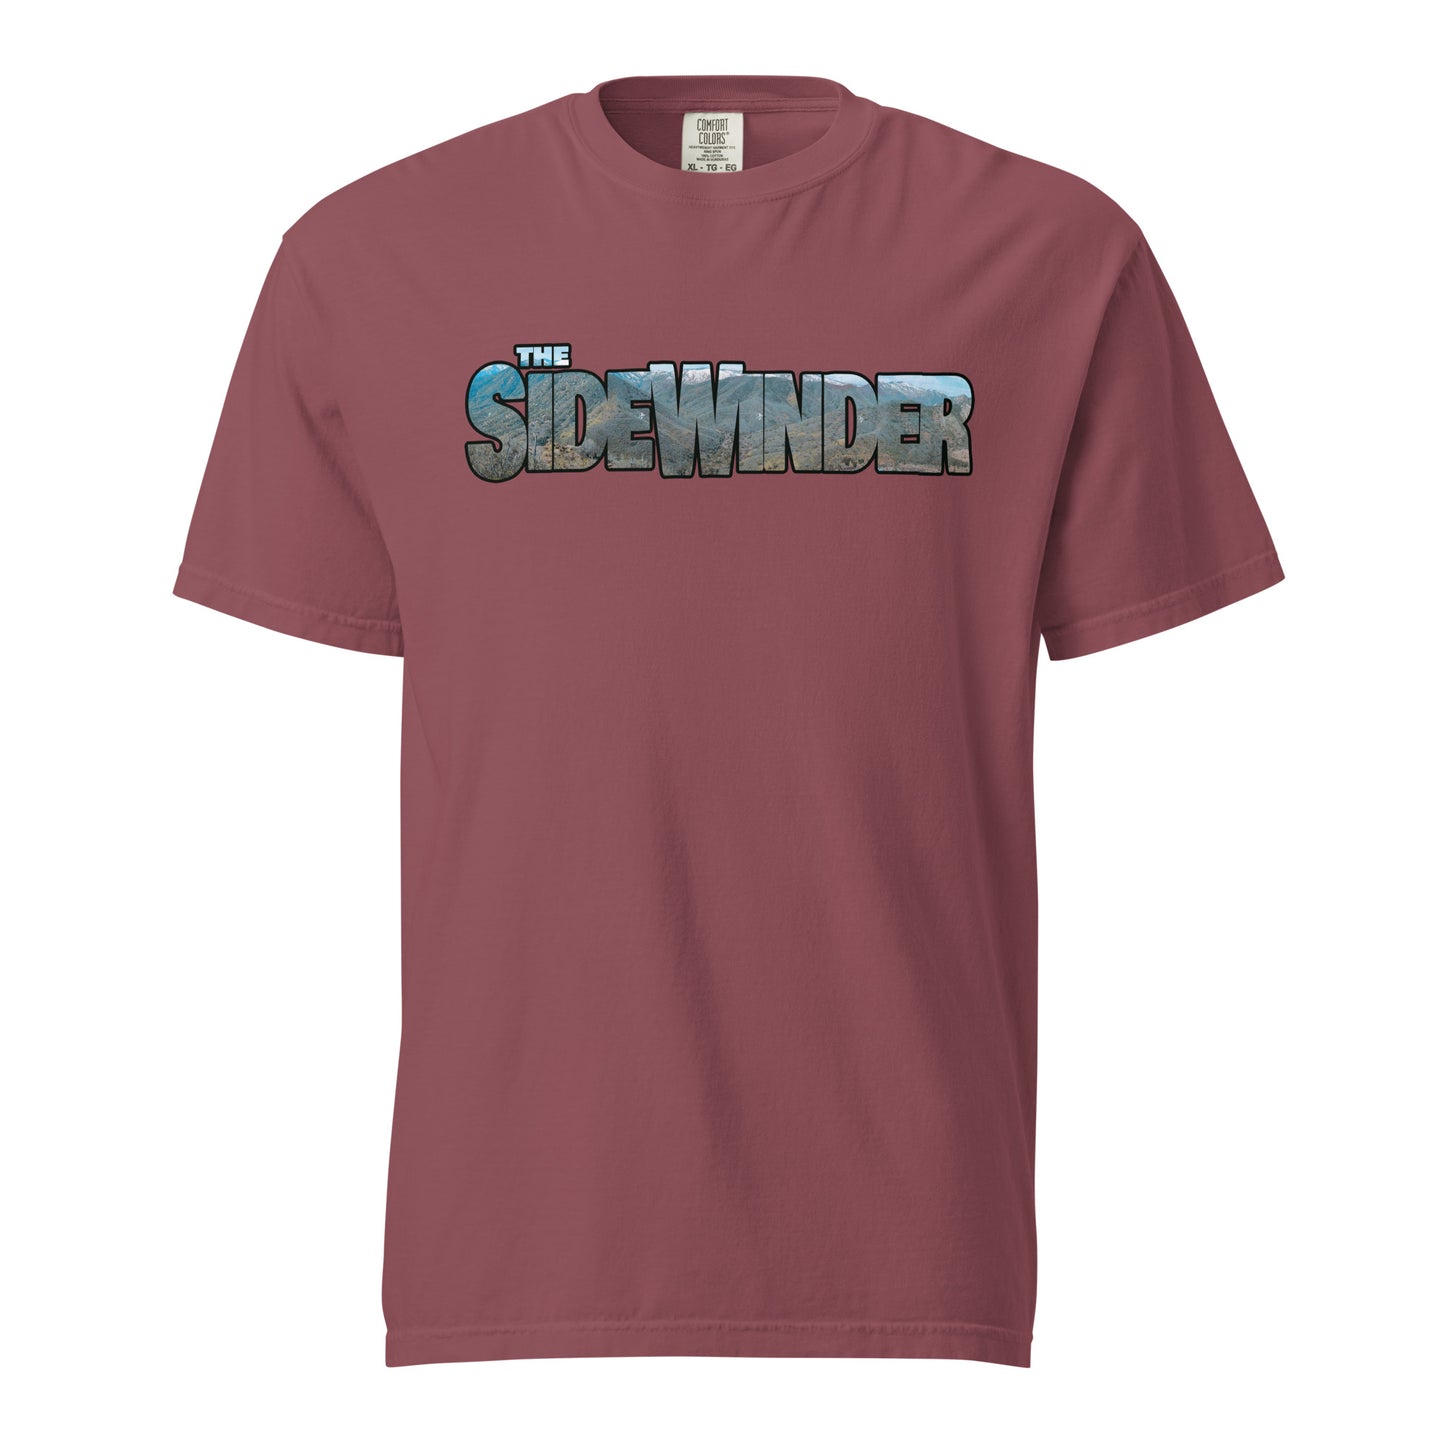 This shirt features an image of a an F-35 performing a low level pass through mountains contained inside of the words "The Sidewinder"